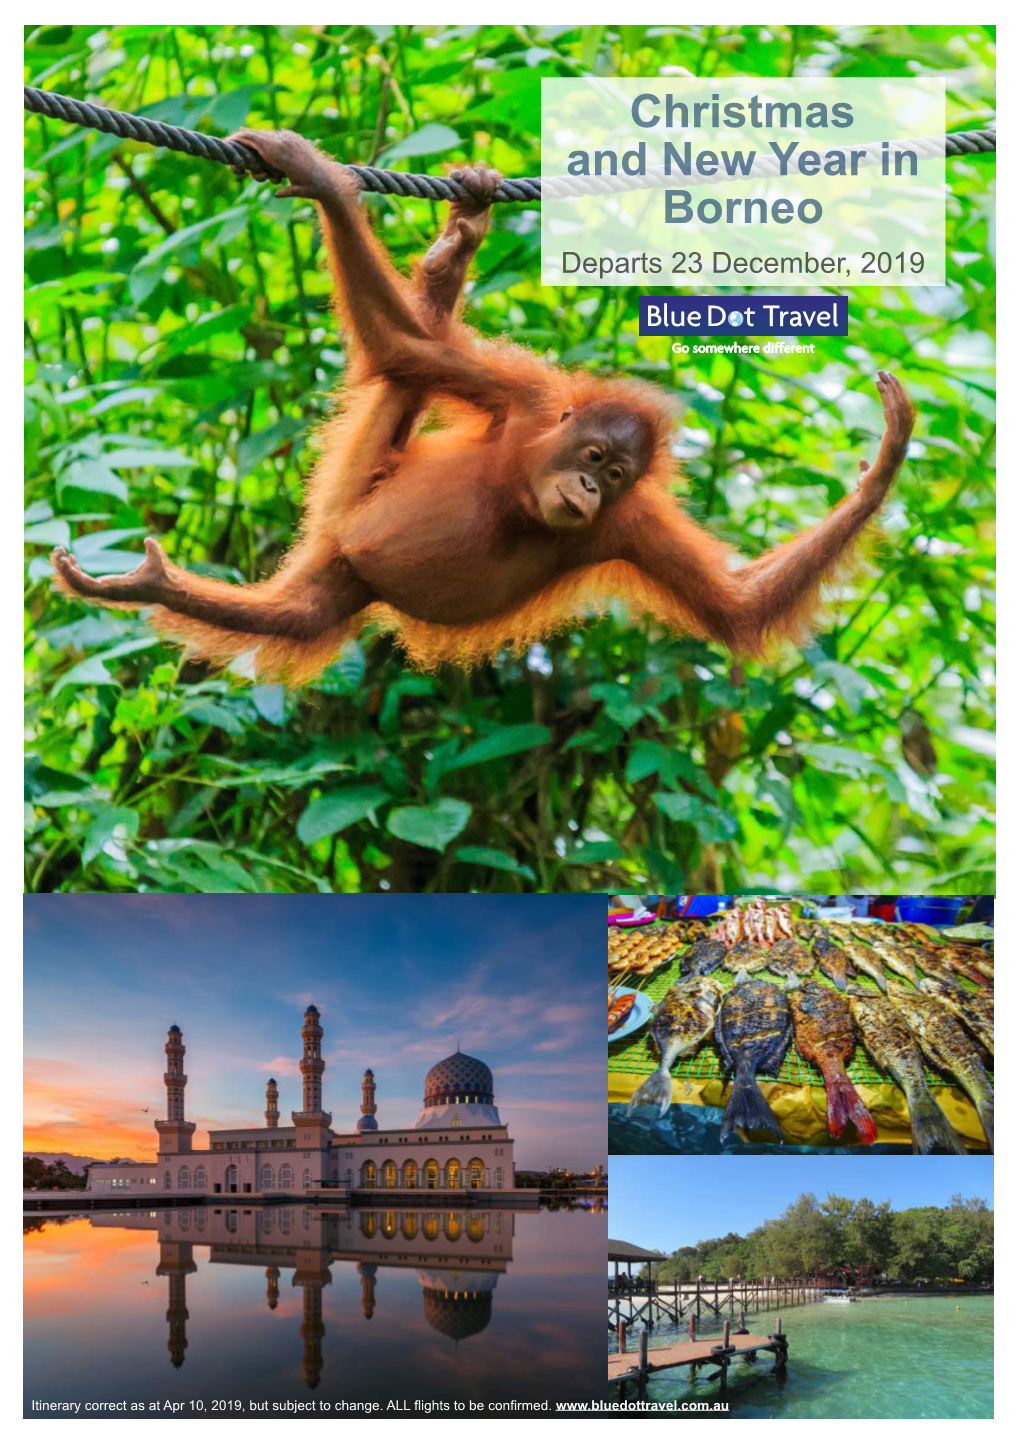 Christmas and New Year in Borneo Departs 23 December, 2019